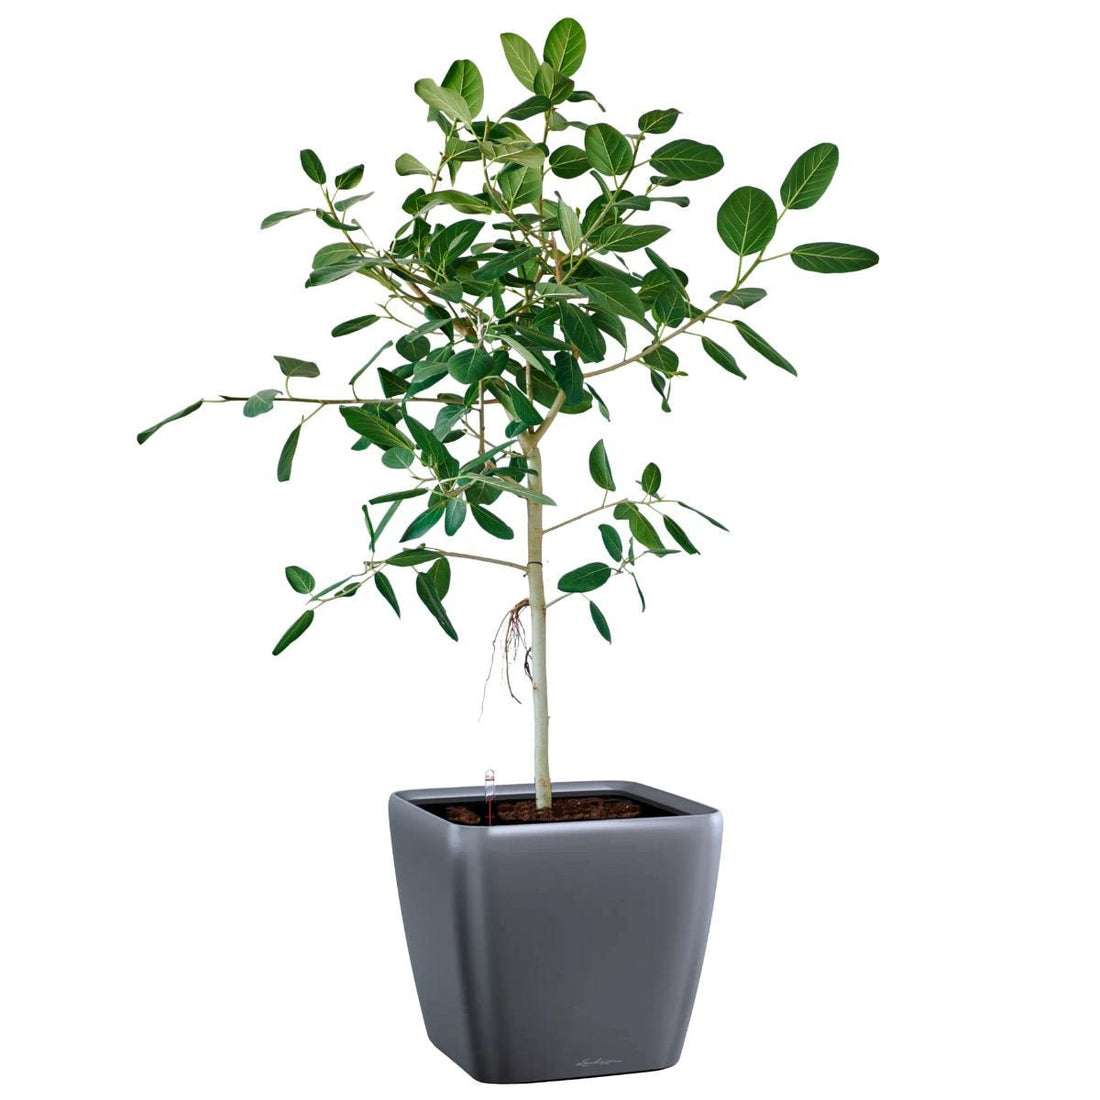 Ficus Audrey Potted In Lechuza Quadro 50 Planter - Charcoal Metallic - My City Plants